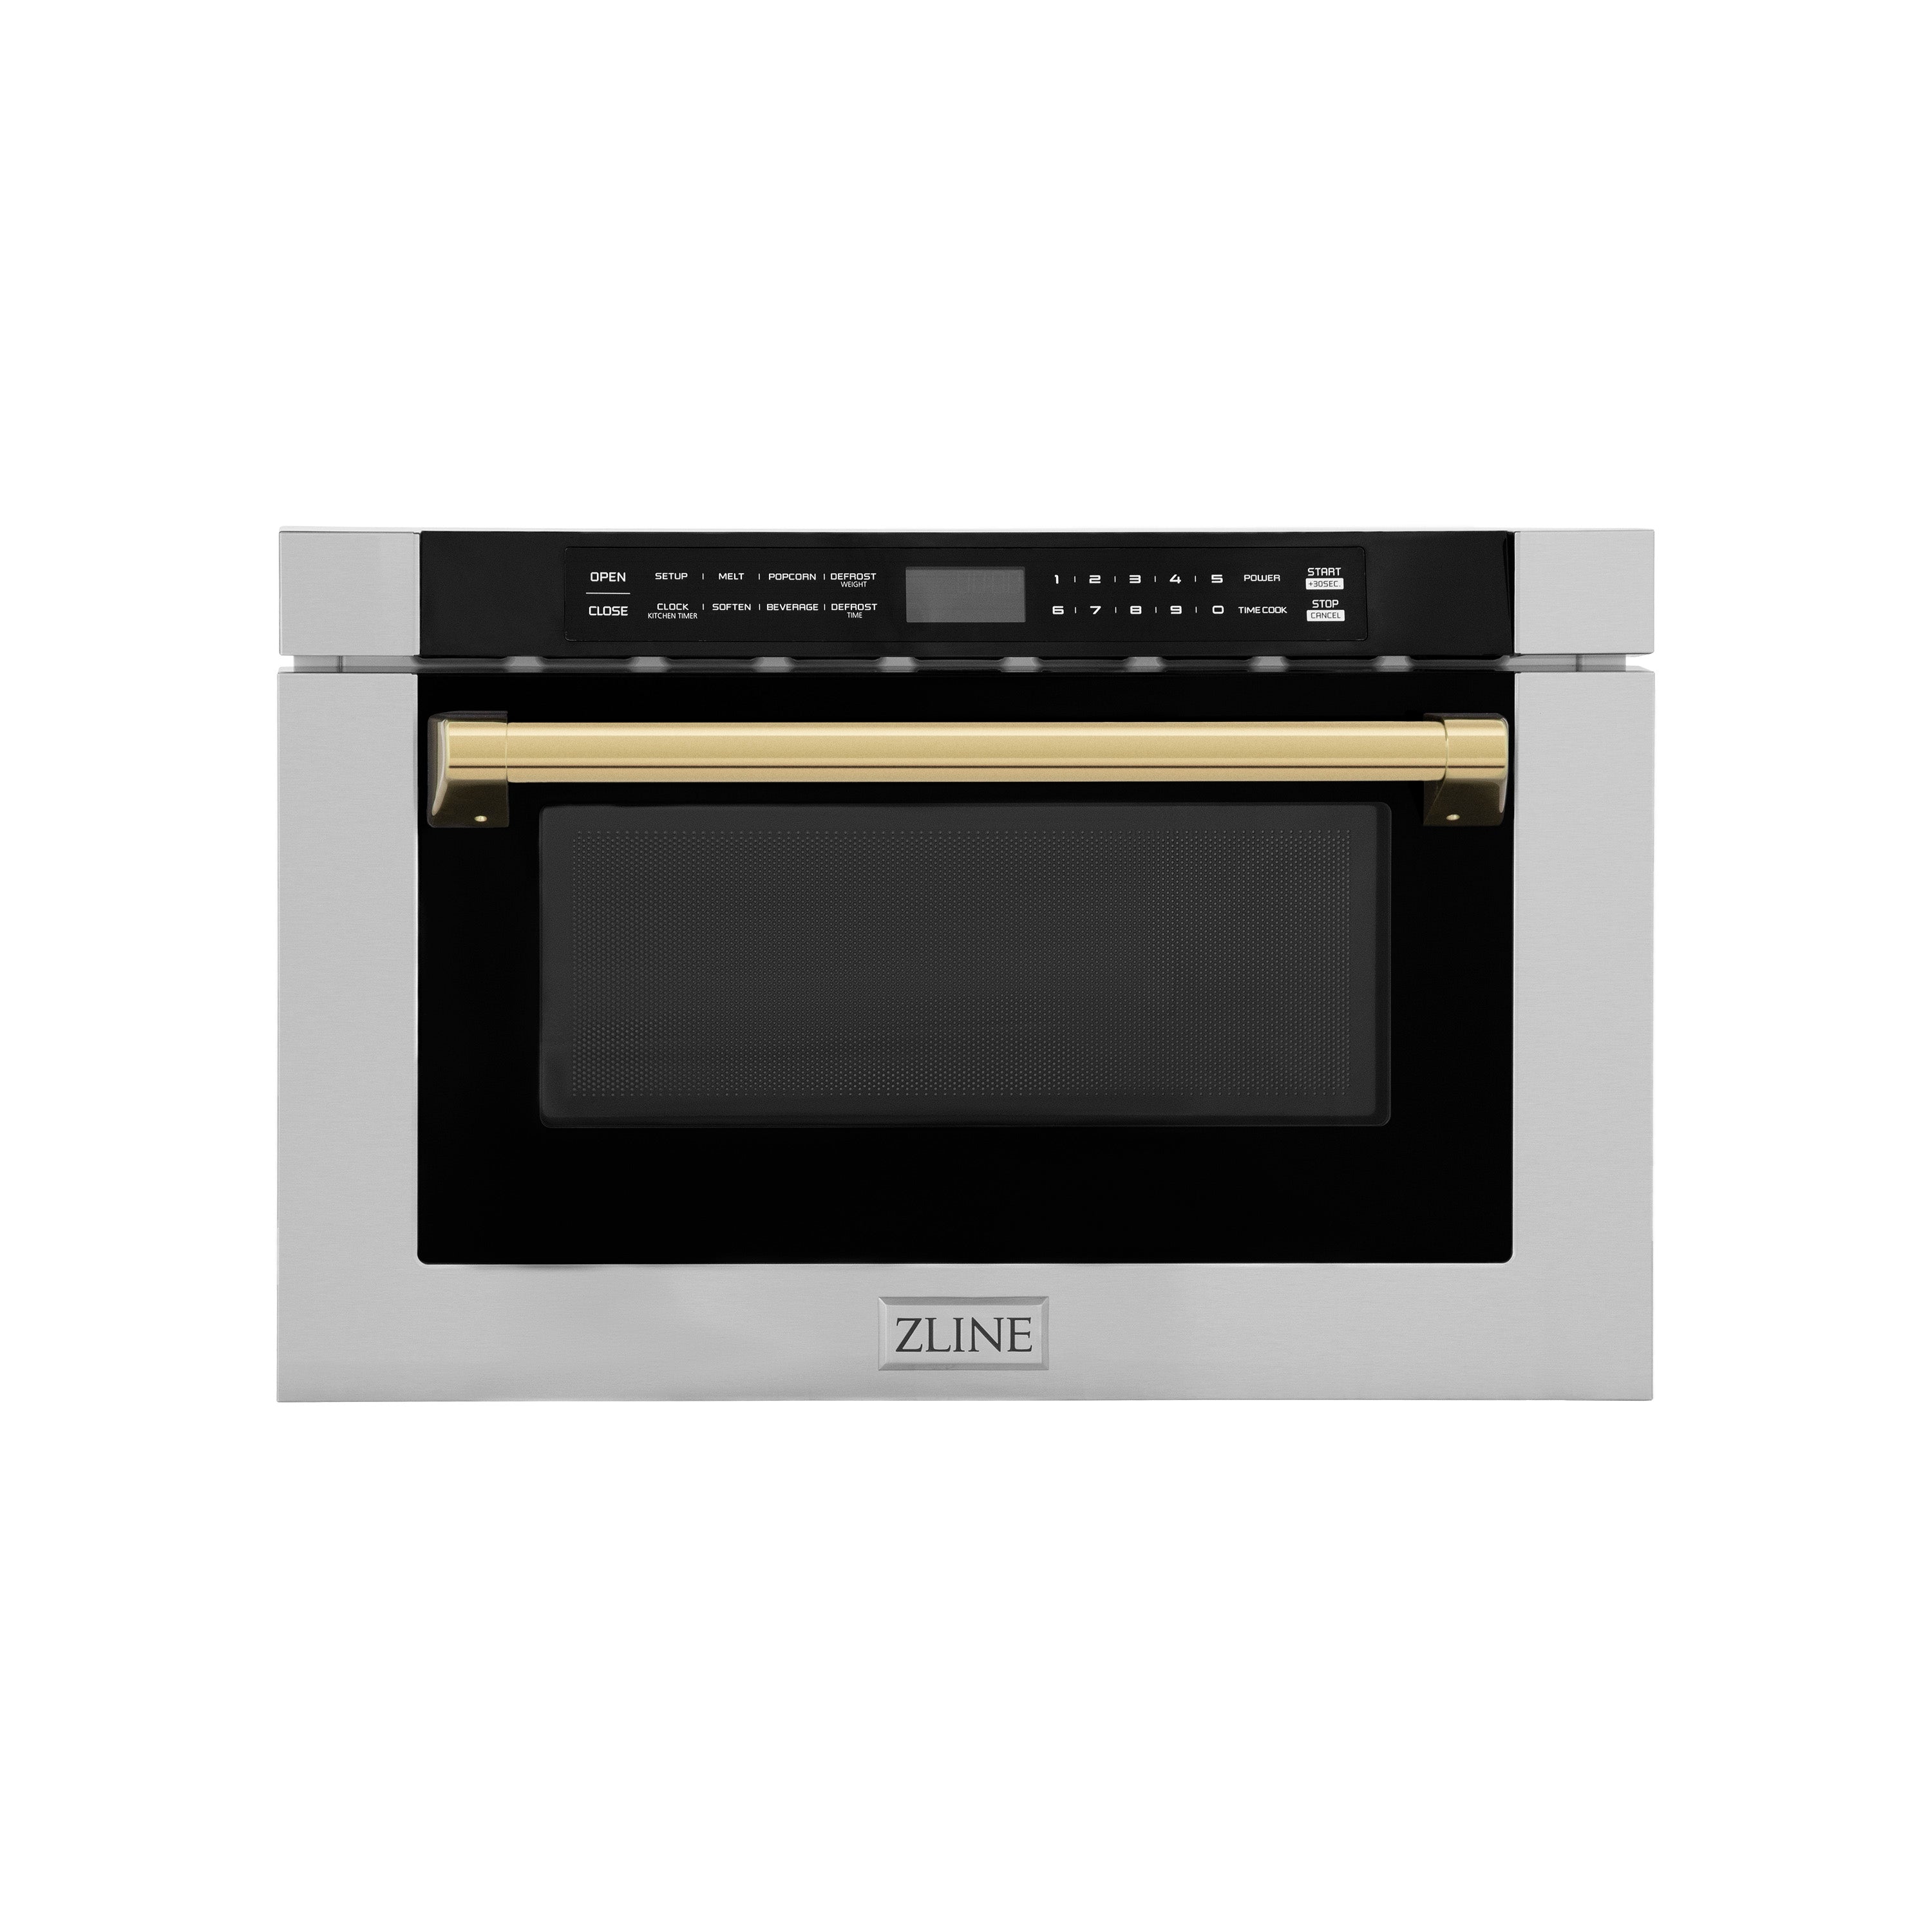 ZLINE Autograph Edition 24" 1.2 cu. ft. Built-in Microwave Drawer with a Traditional Handle in Stainless Steel and Gold Accents (MWDZ-1-H-G) - New Star Living